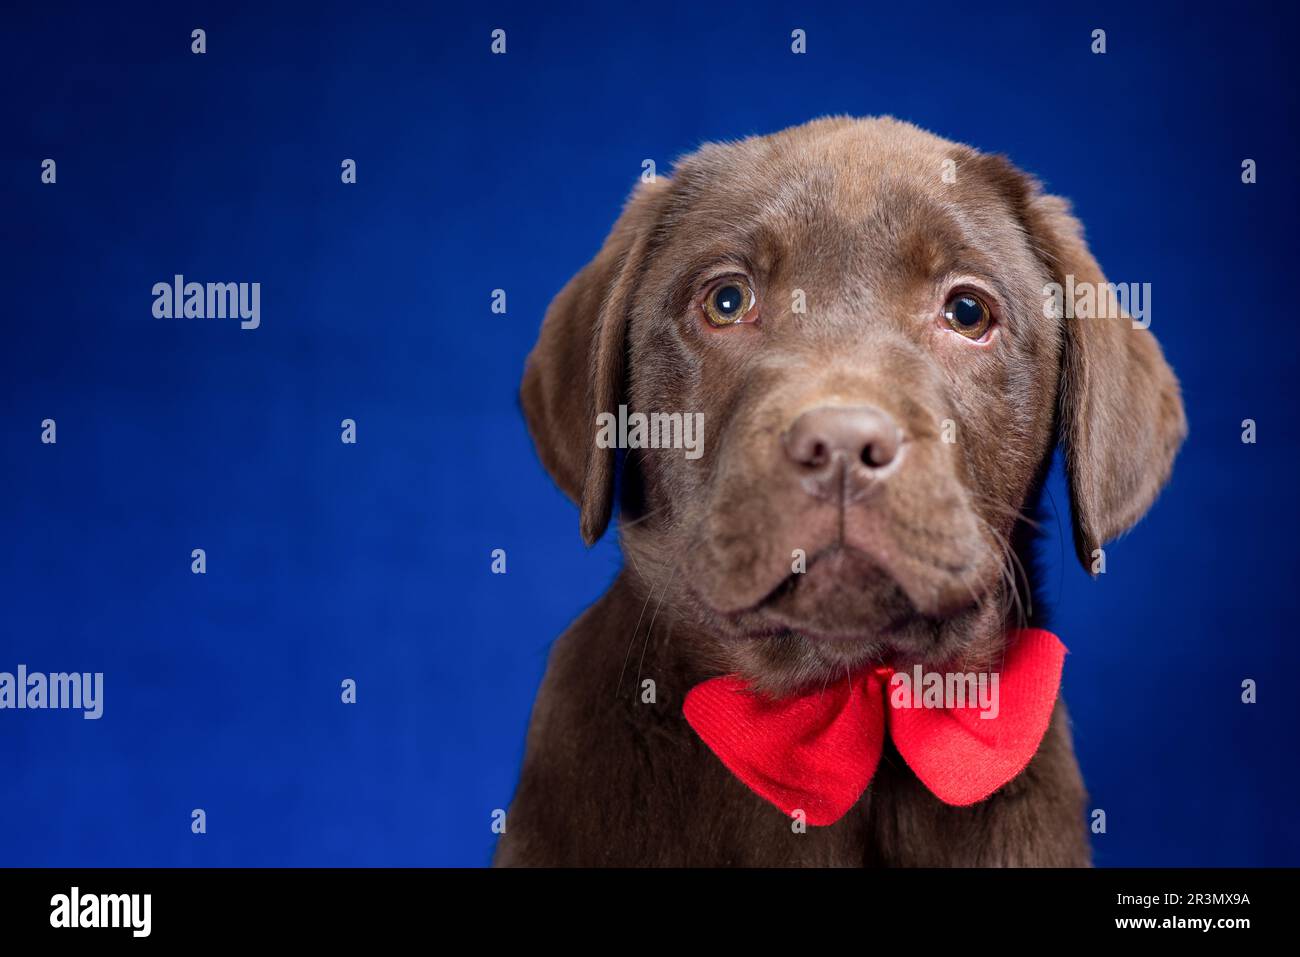 Portrait of a chocolate labrador puppy with a red bow on its neck on a blue background Stock Photo